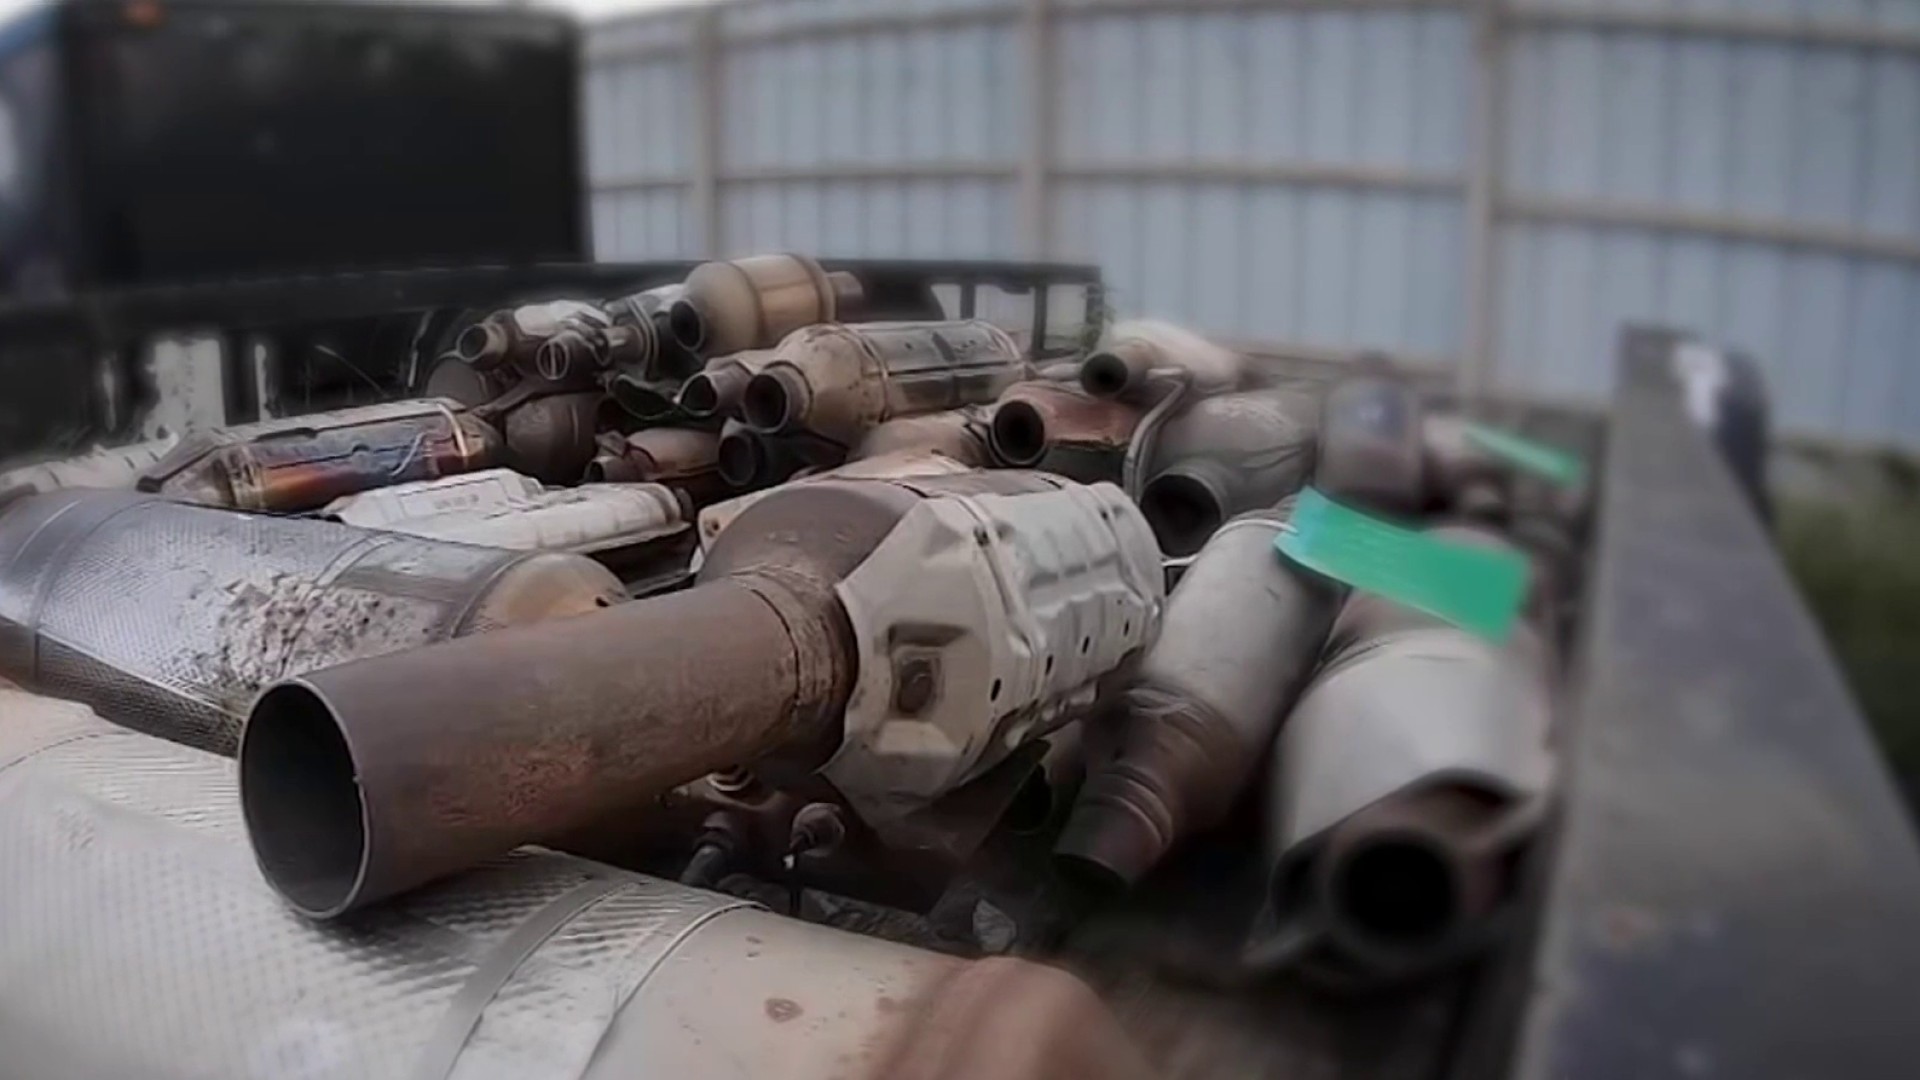 Catalytic Converter Thefts Up More Than 600% in DC Area in Recent Years